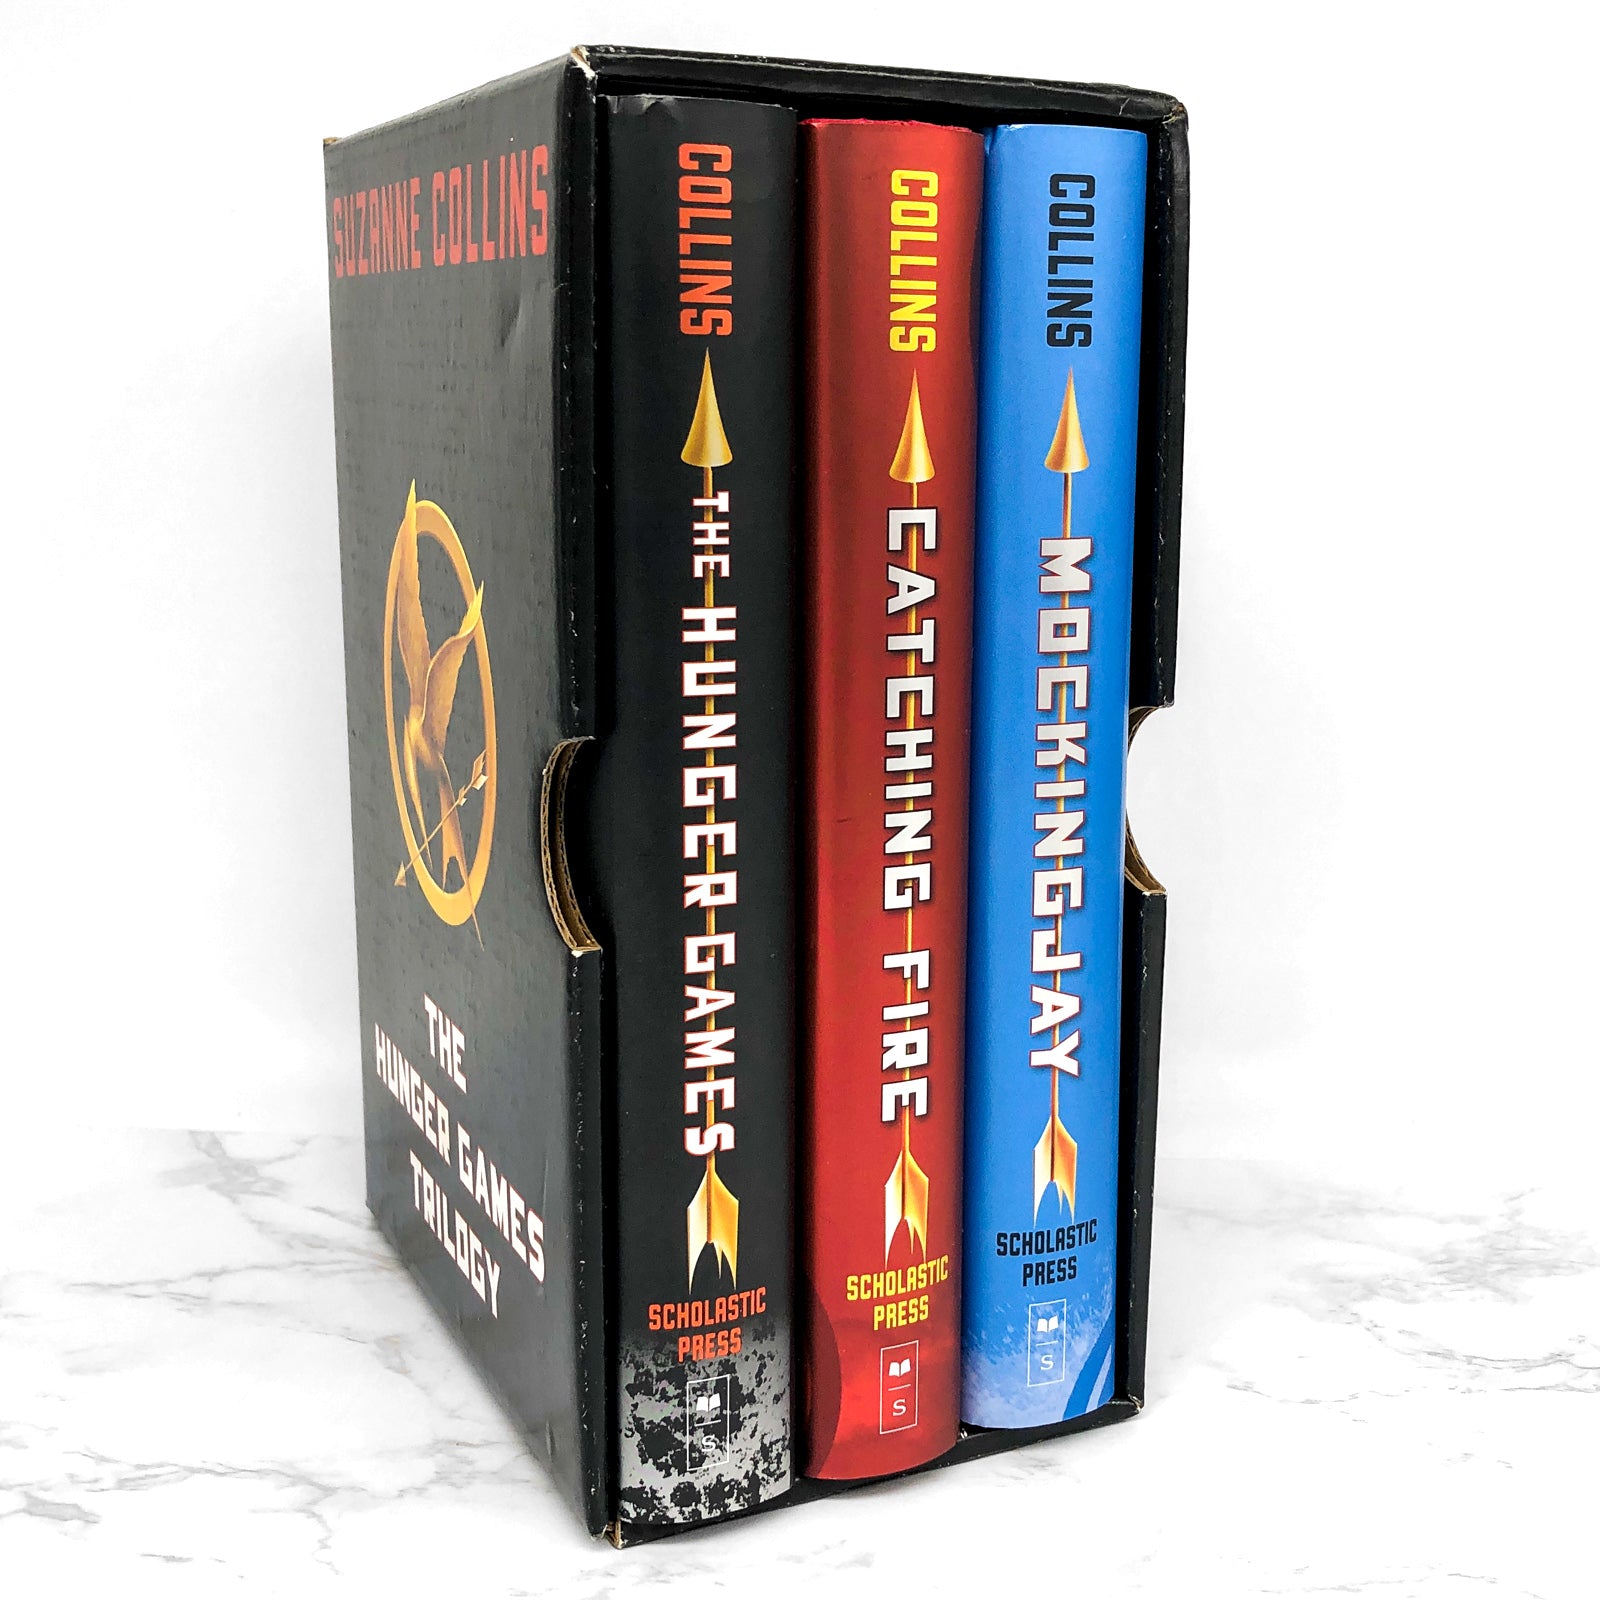 The Hunger Games Trilogy - Scholastic Shop